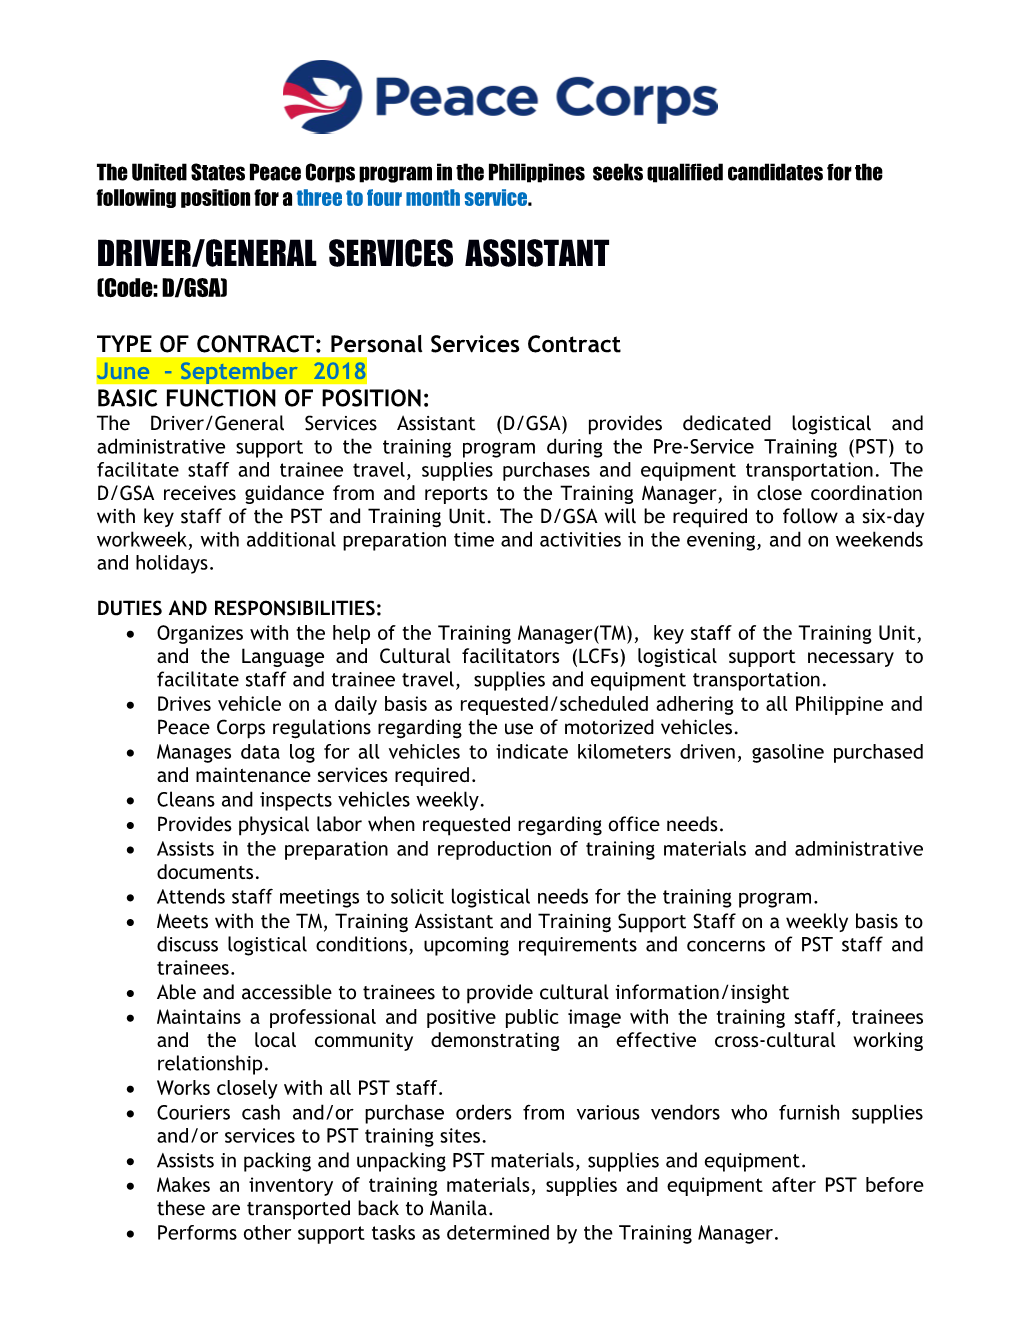 TYPE of CONTRACT: Personal Services Contract